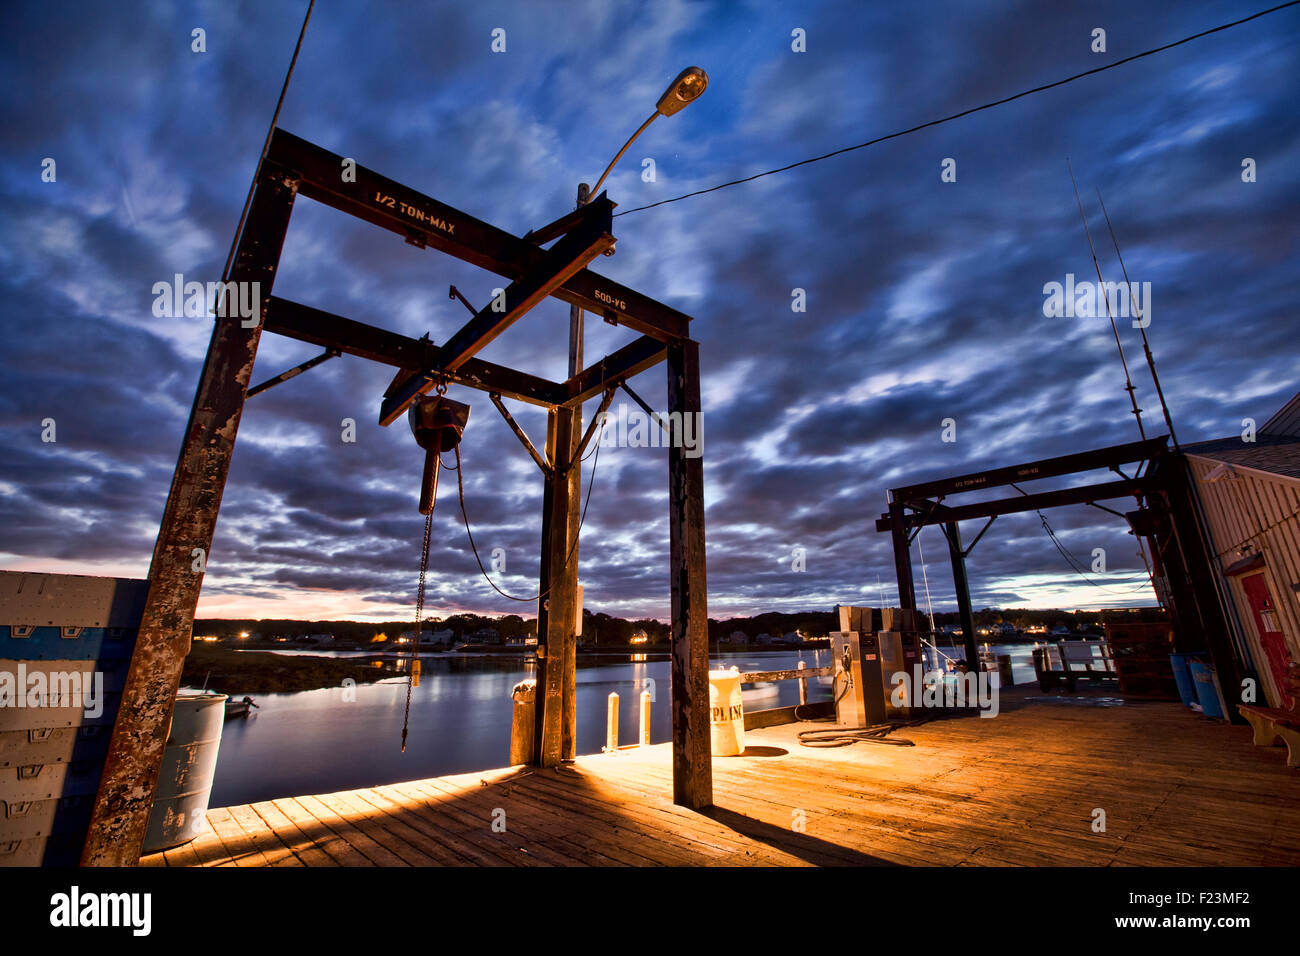 Looking up at the loading docks in Cape Porpoise Harbor in Southern Maine, just after sunset Stock Photo